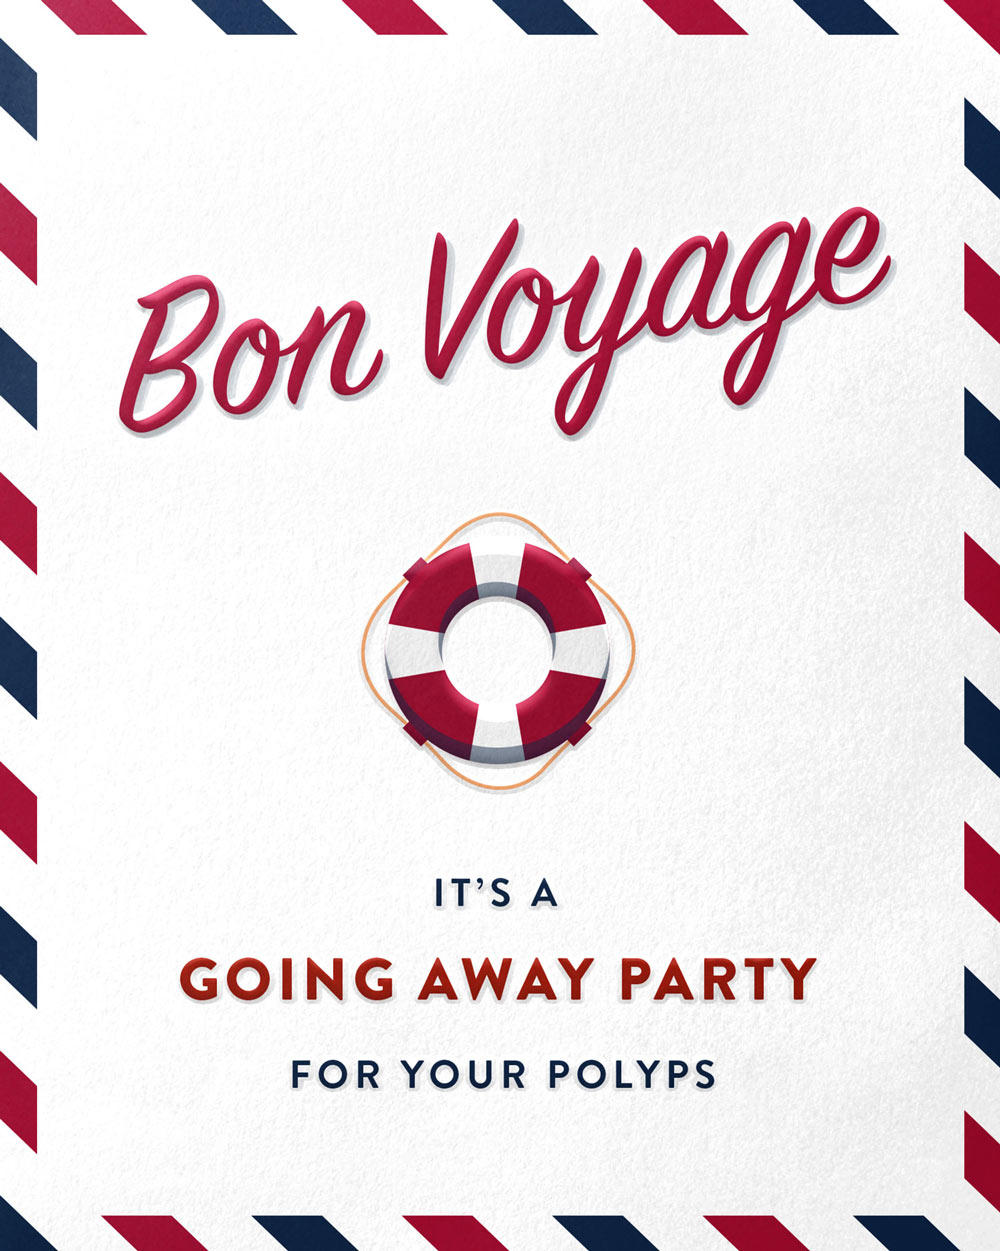 Bon Voyage! It's a going away party for your polyps!